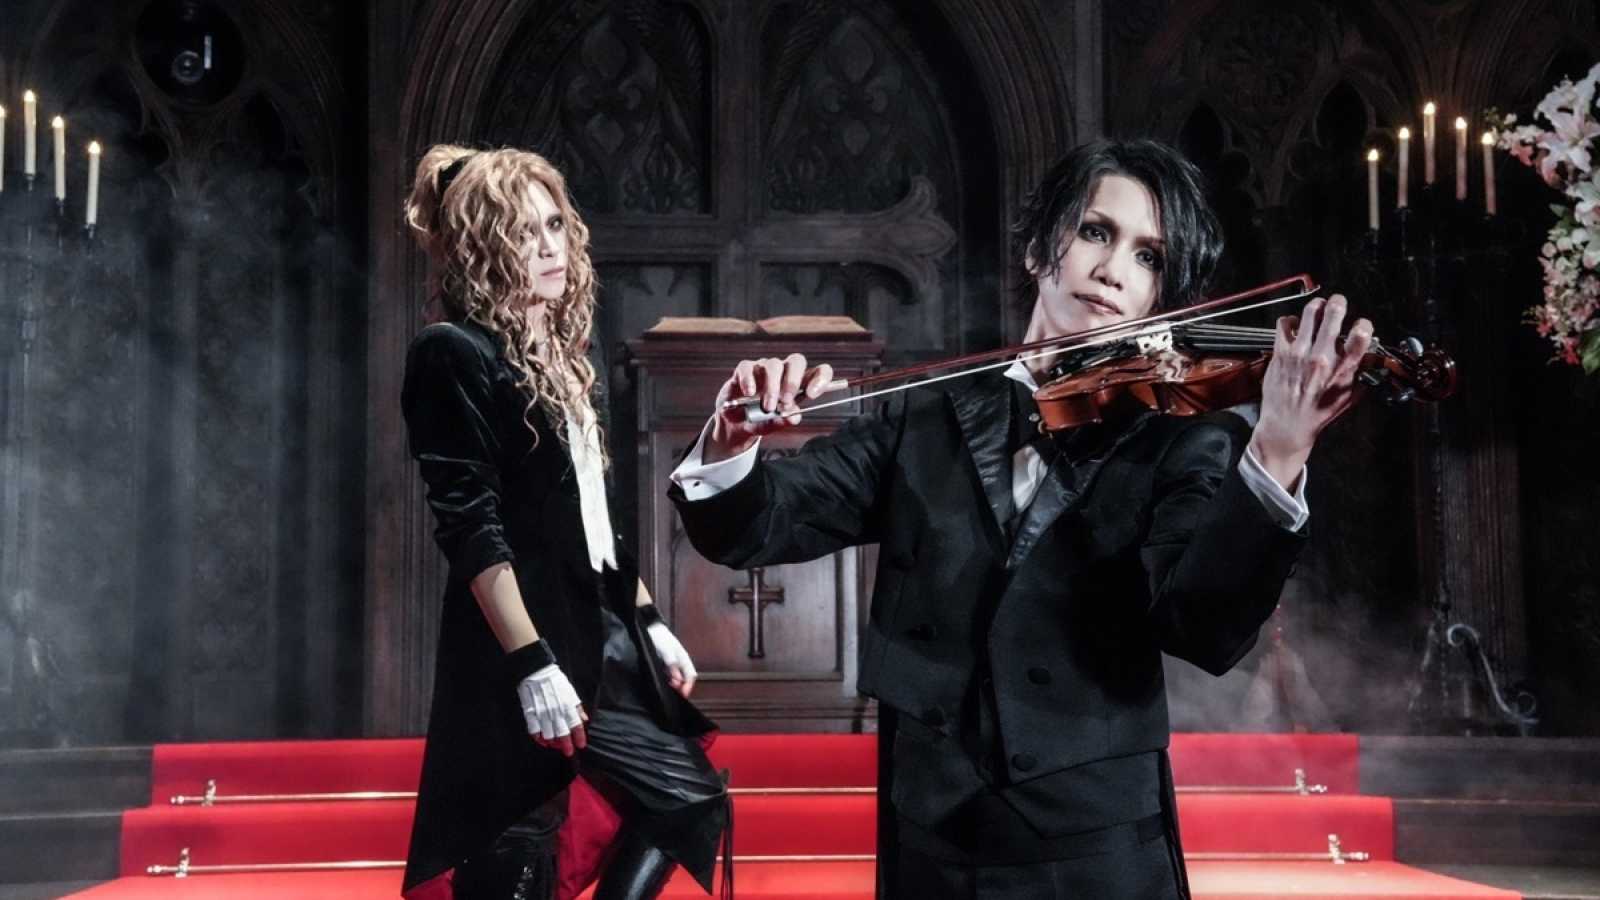 Quattro Cantare Unveils MV of Schubert's "Ave Maria" Featuring KAMIJO © Quattro Cantare. All rights reserved.